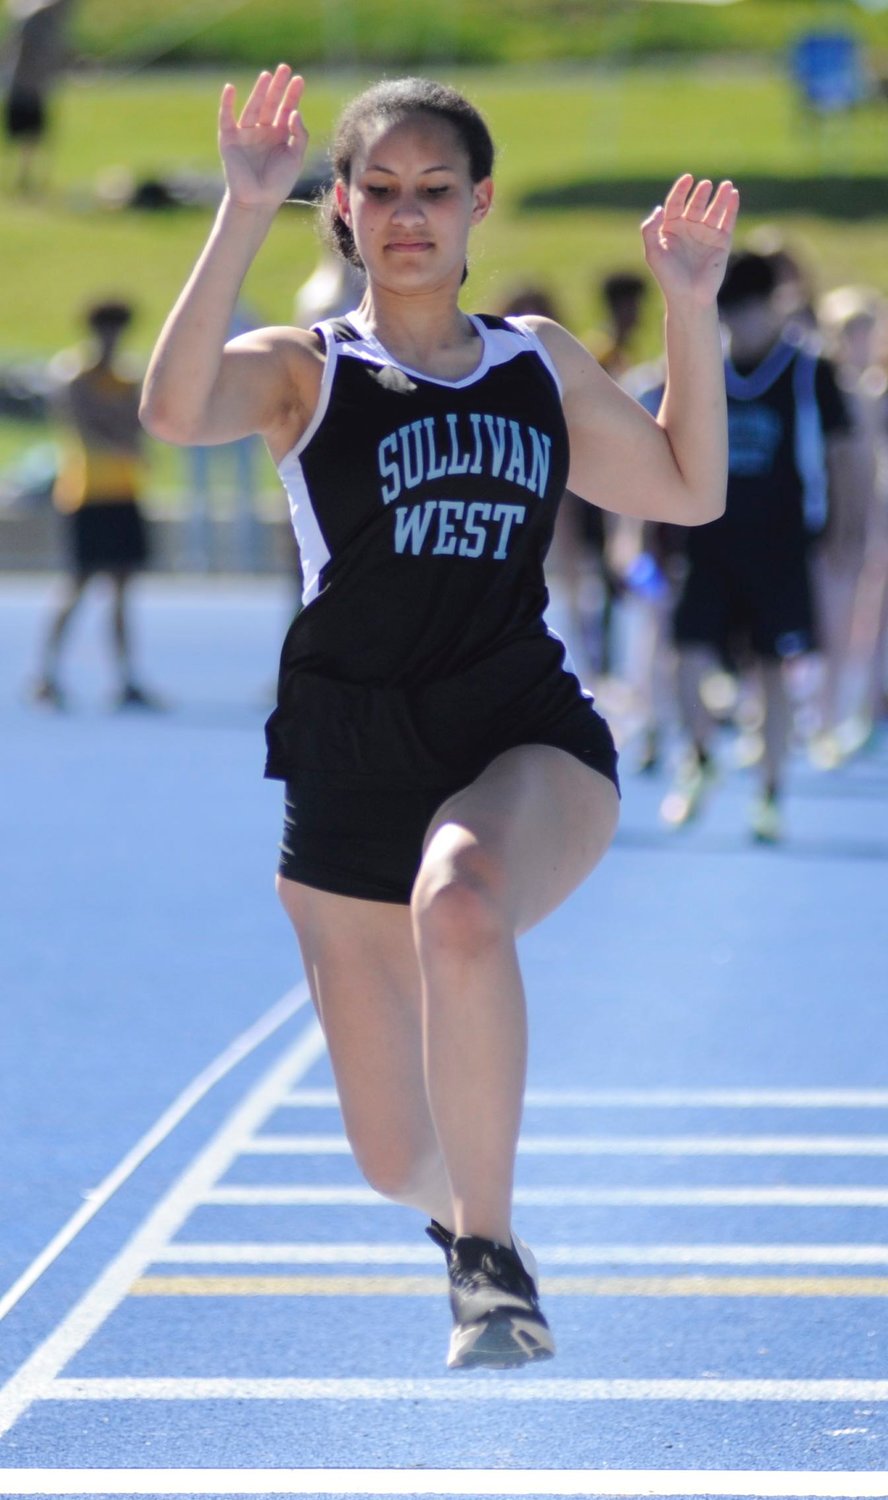 Taking off.  Sullivan West’s Brooke DeCarlo competes in the long jump.